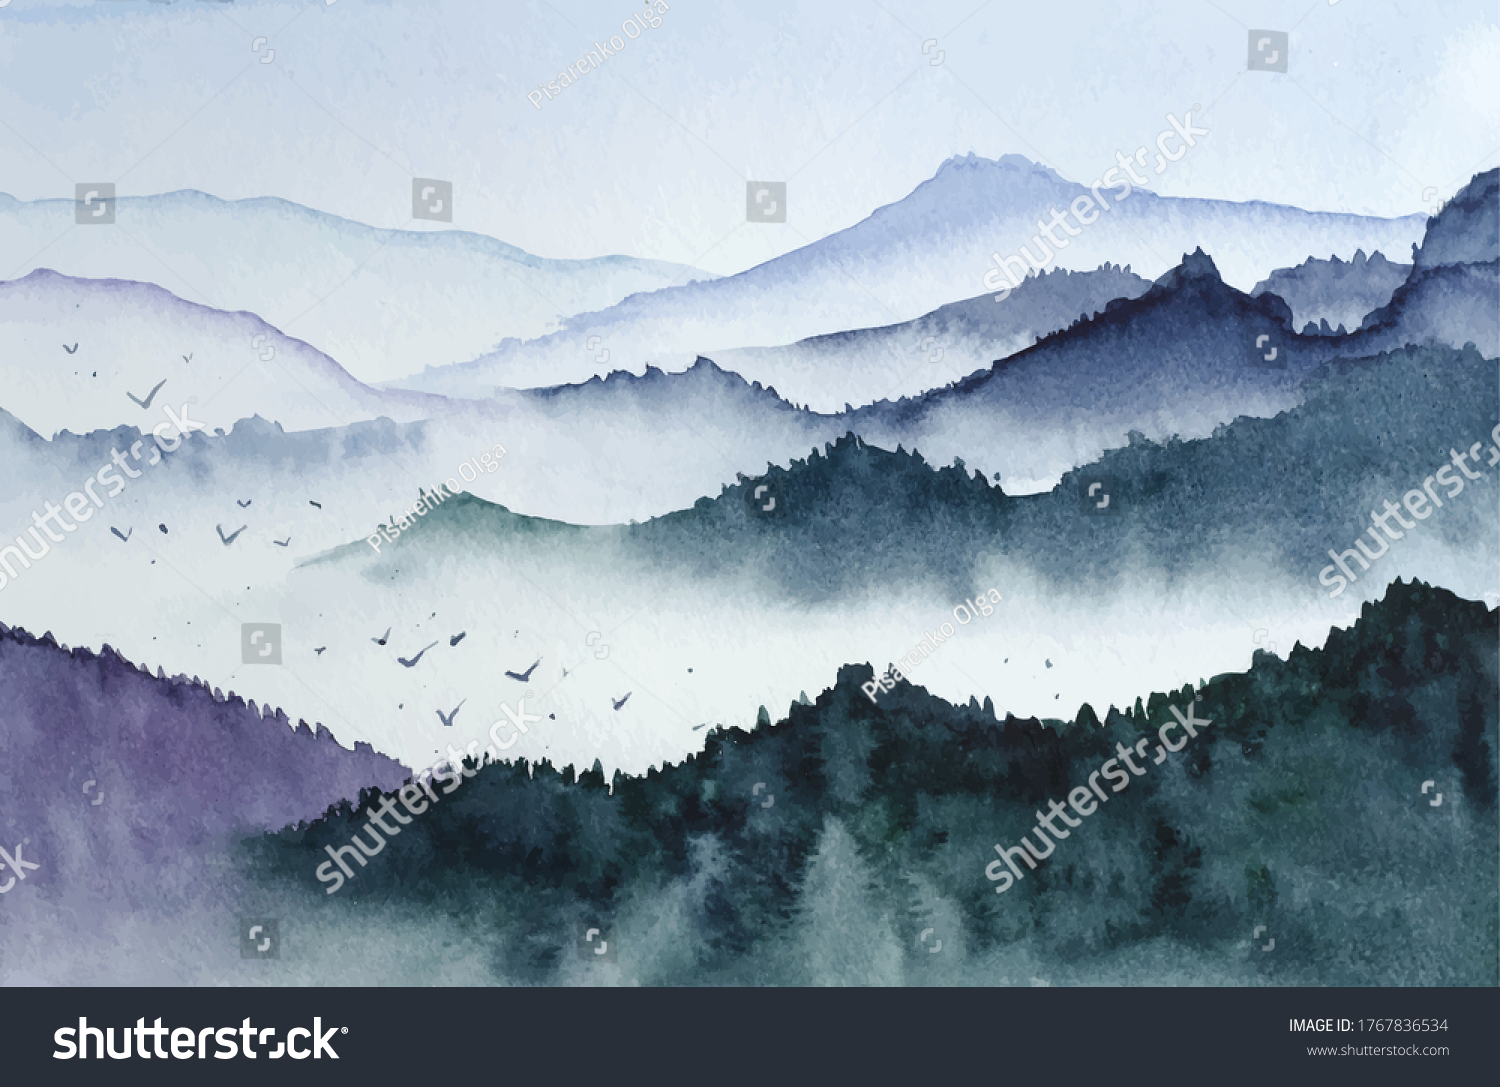 Landscape with mountains, birds and fog in monochrom painted in watercolor in vector #1767836534